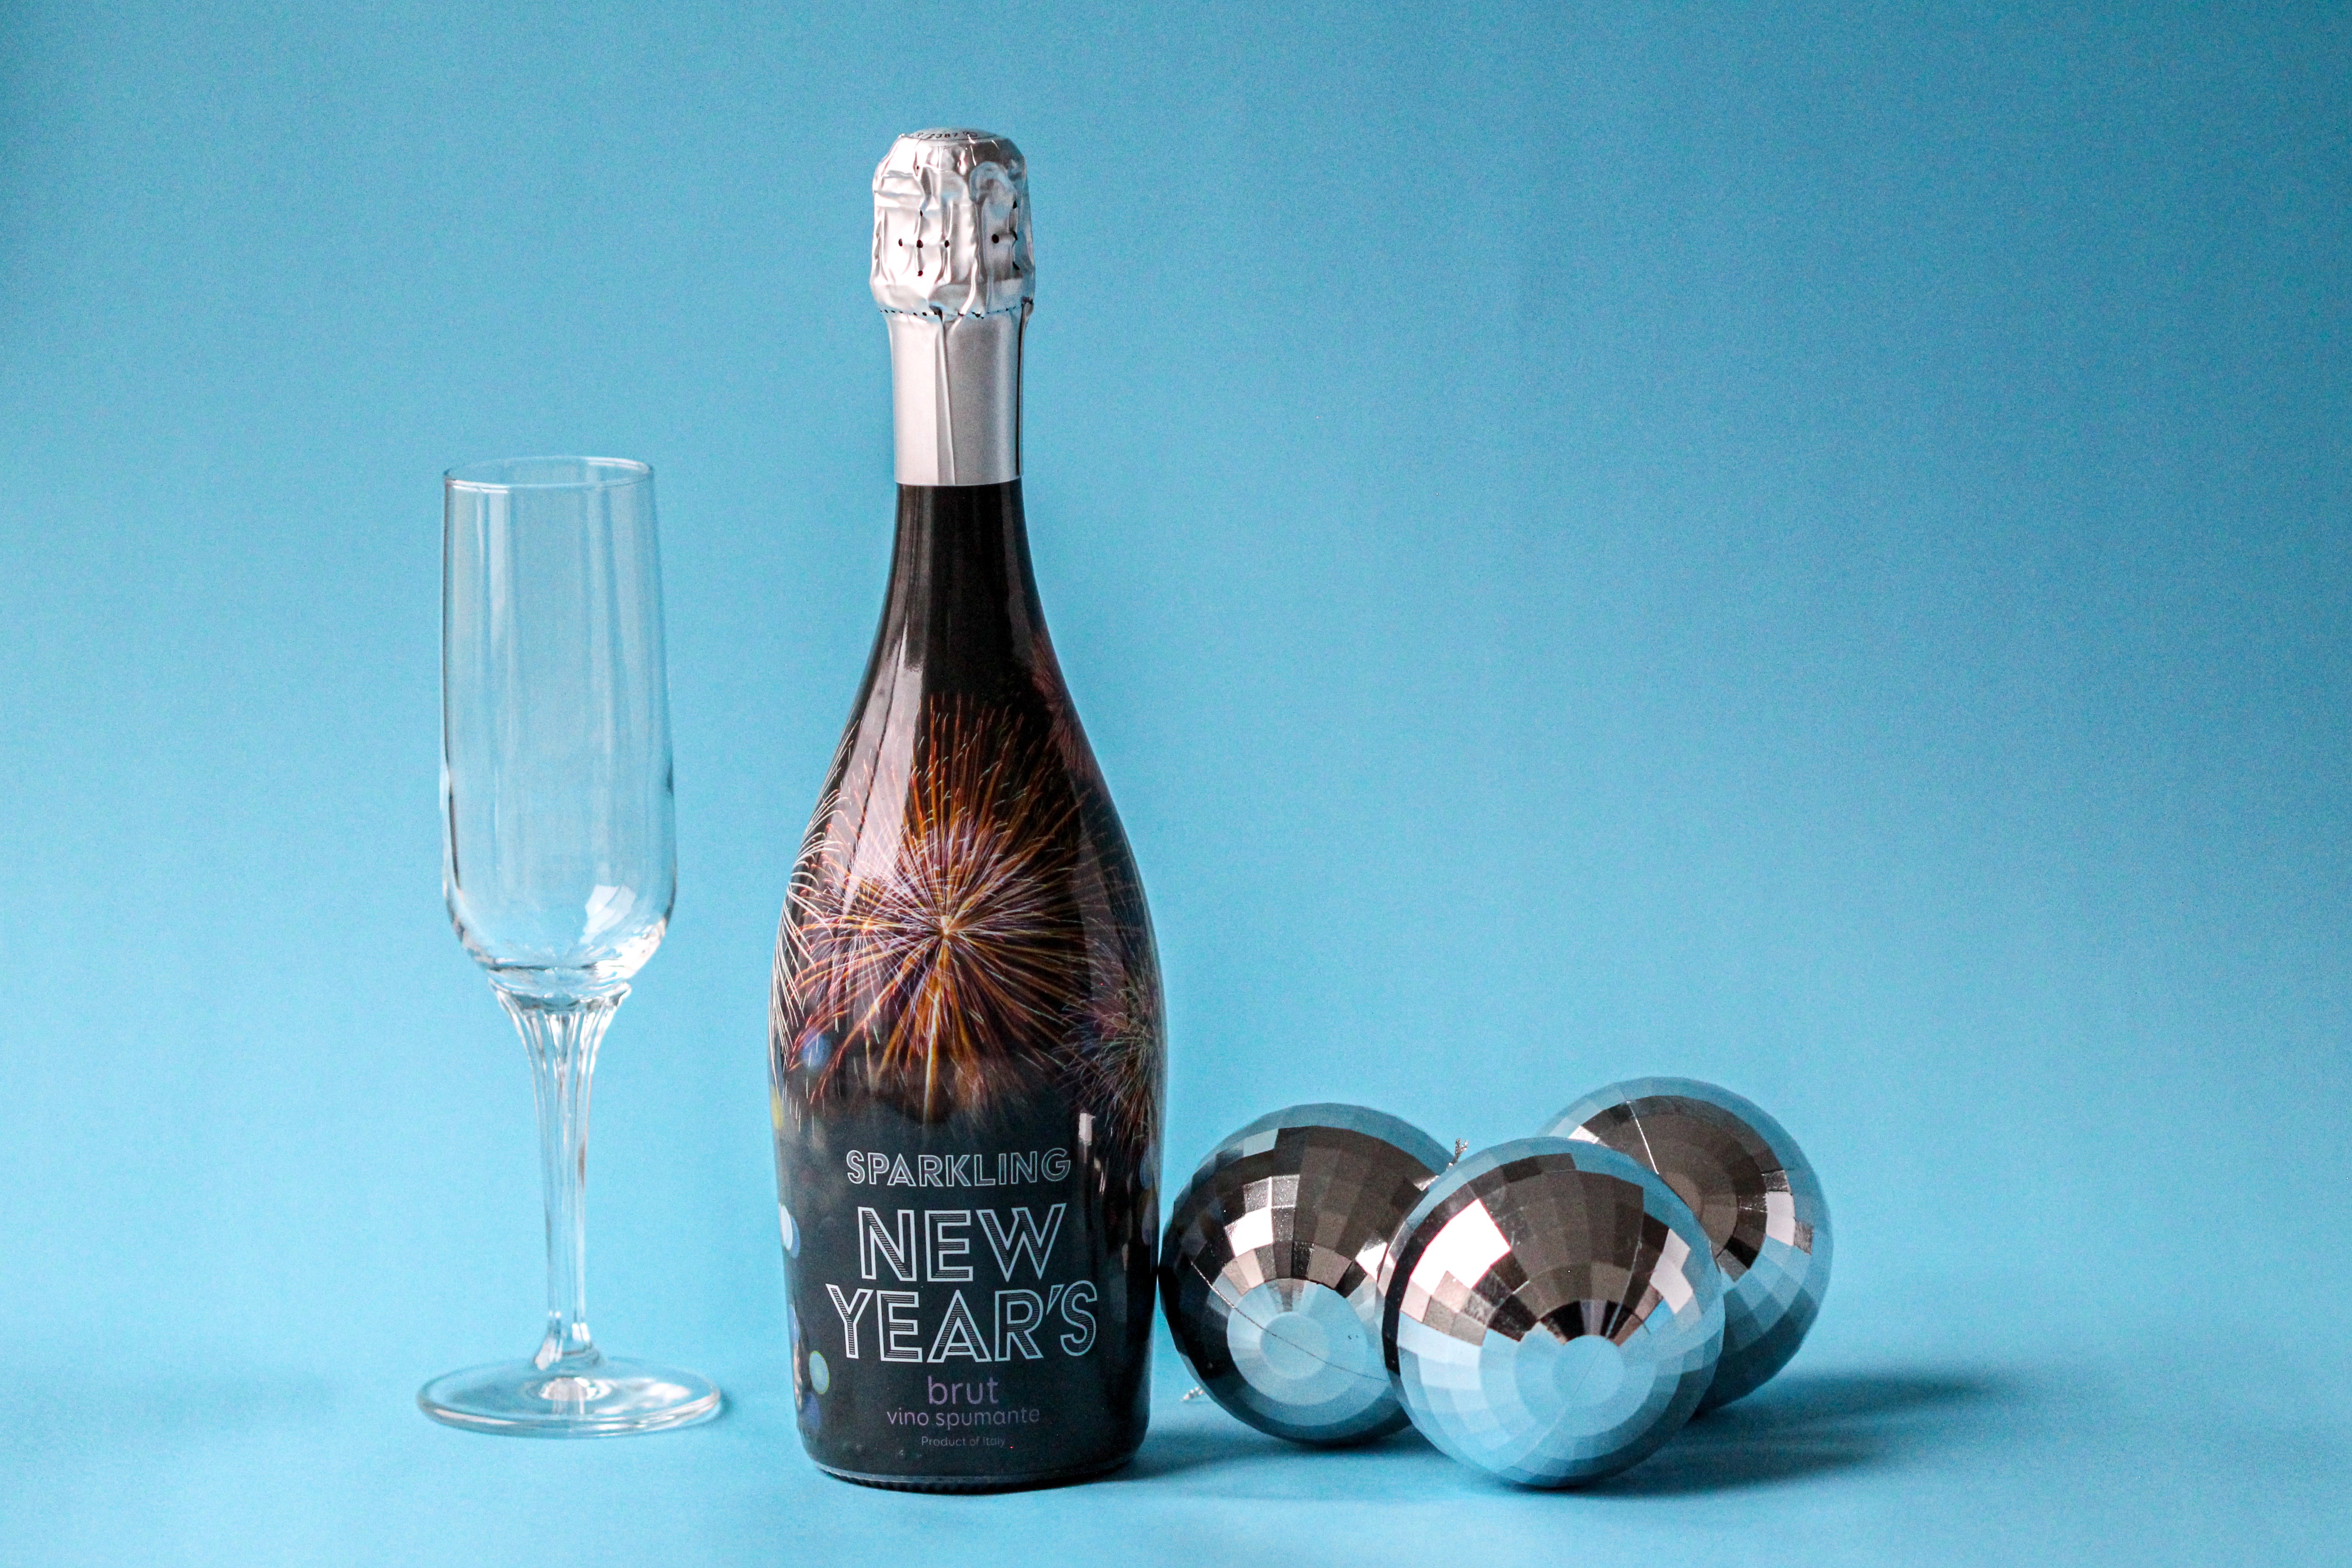 New Year’s Sparkling Brut